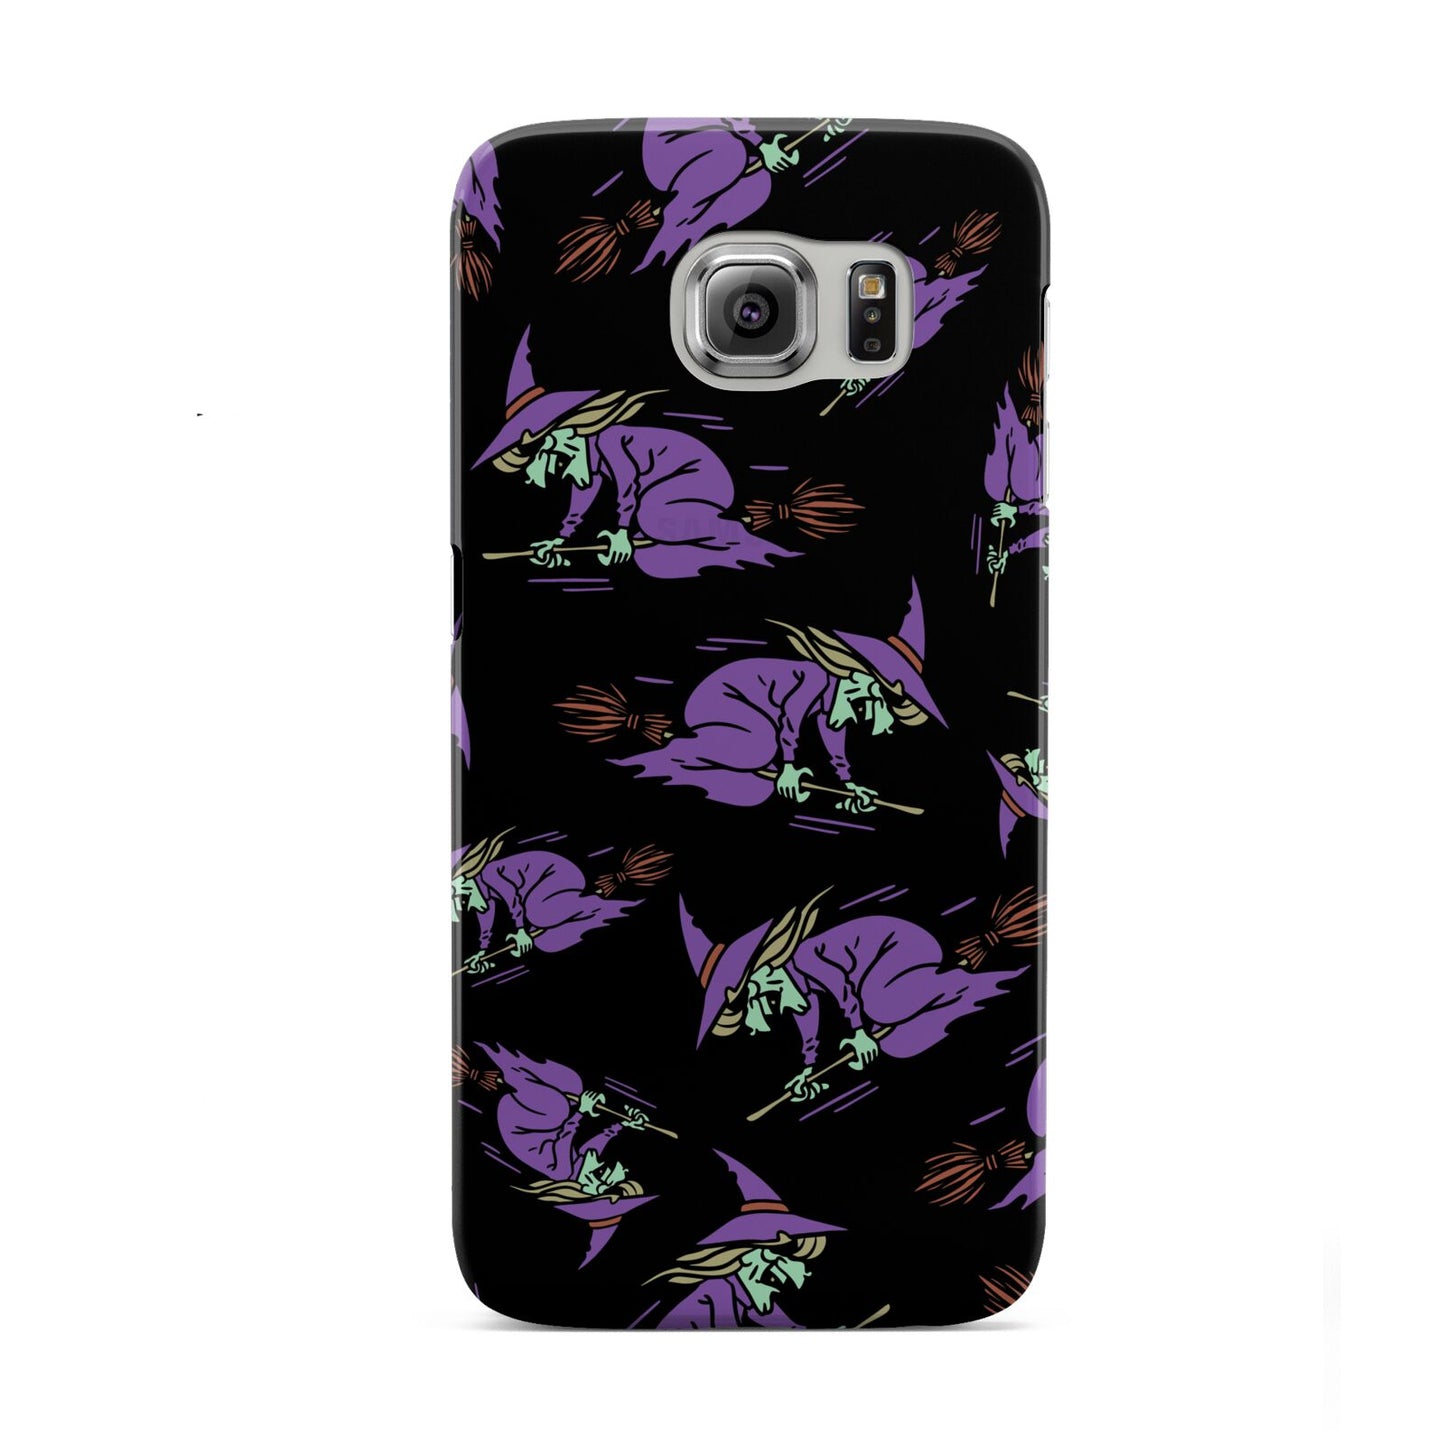 Flying Witches Samsung Galaxy S6 Case